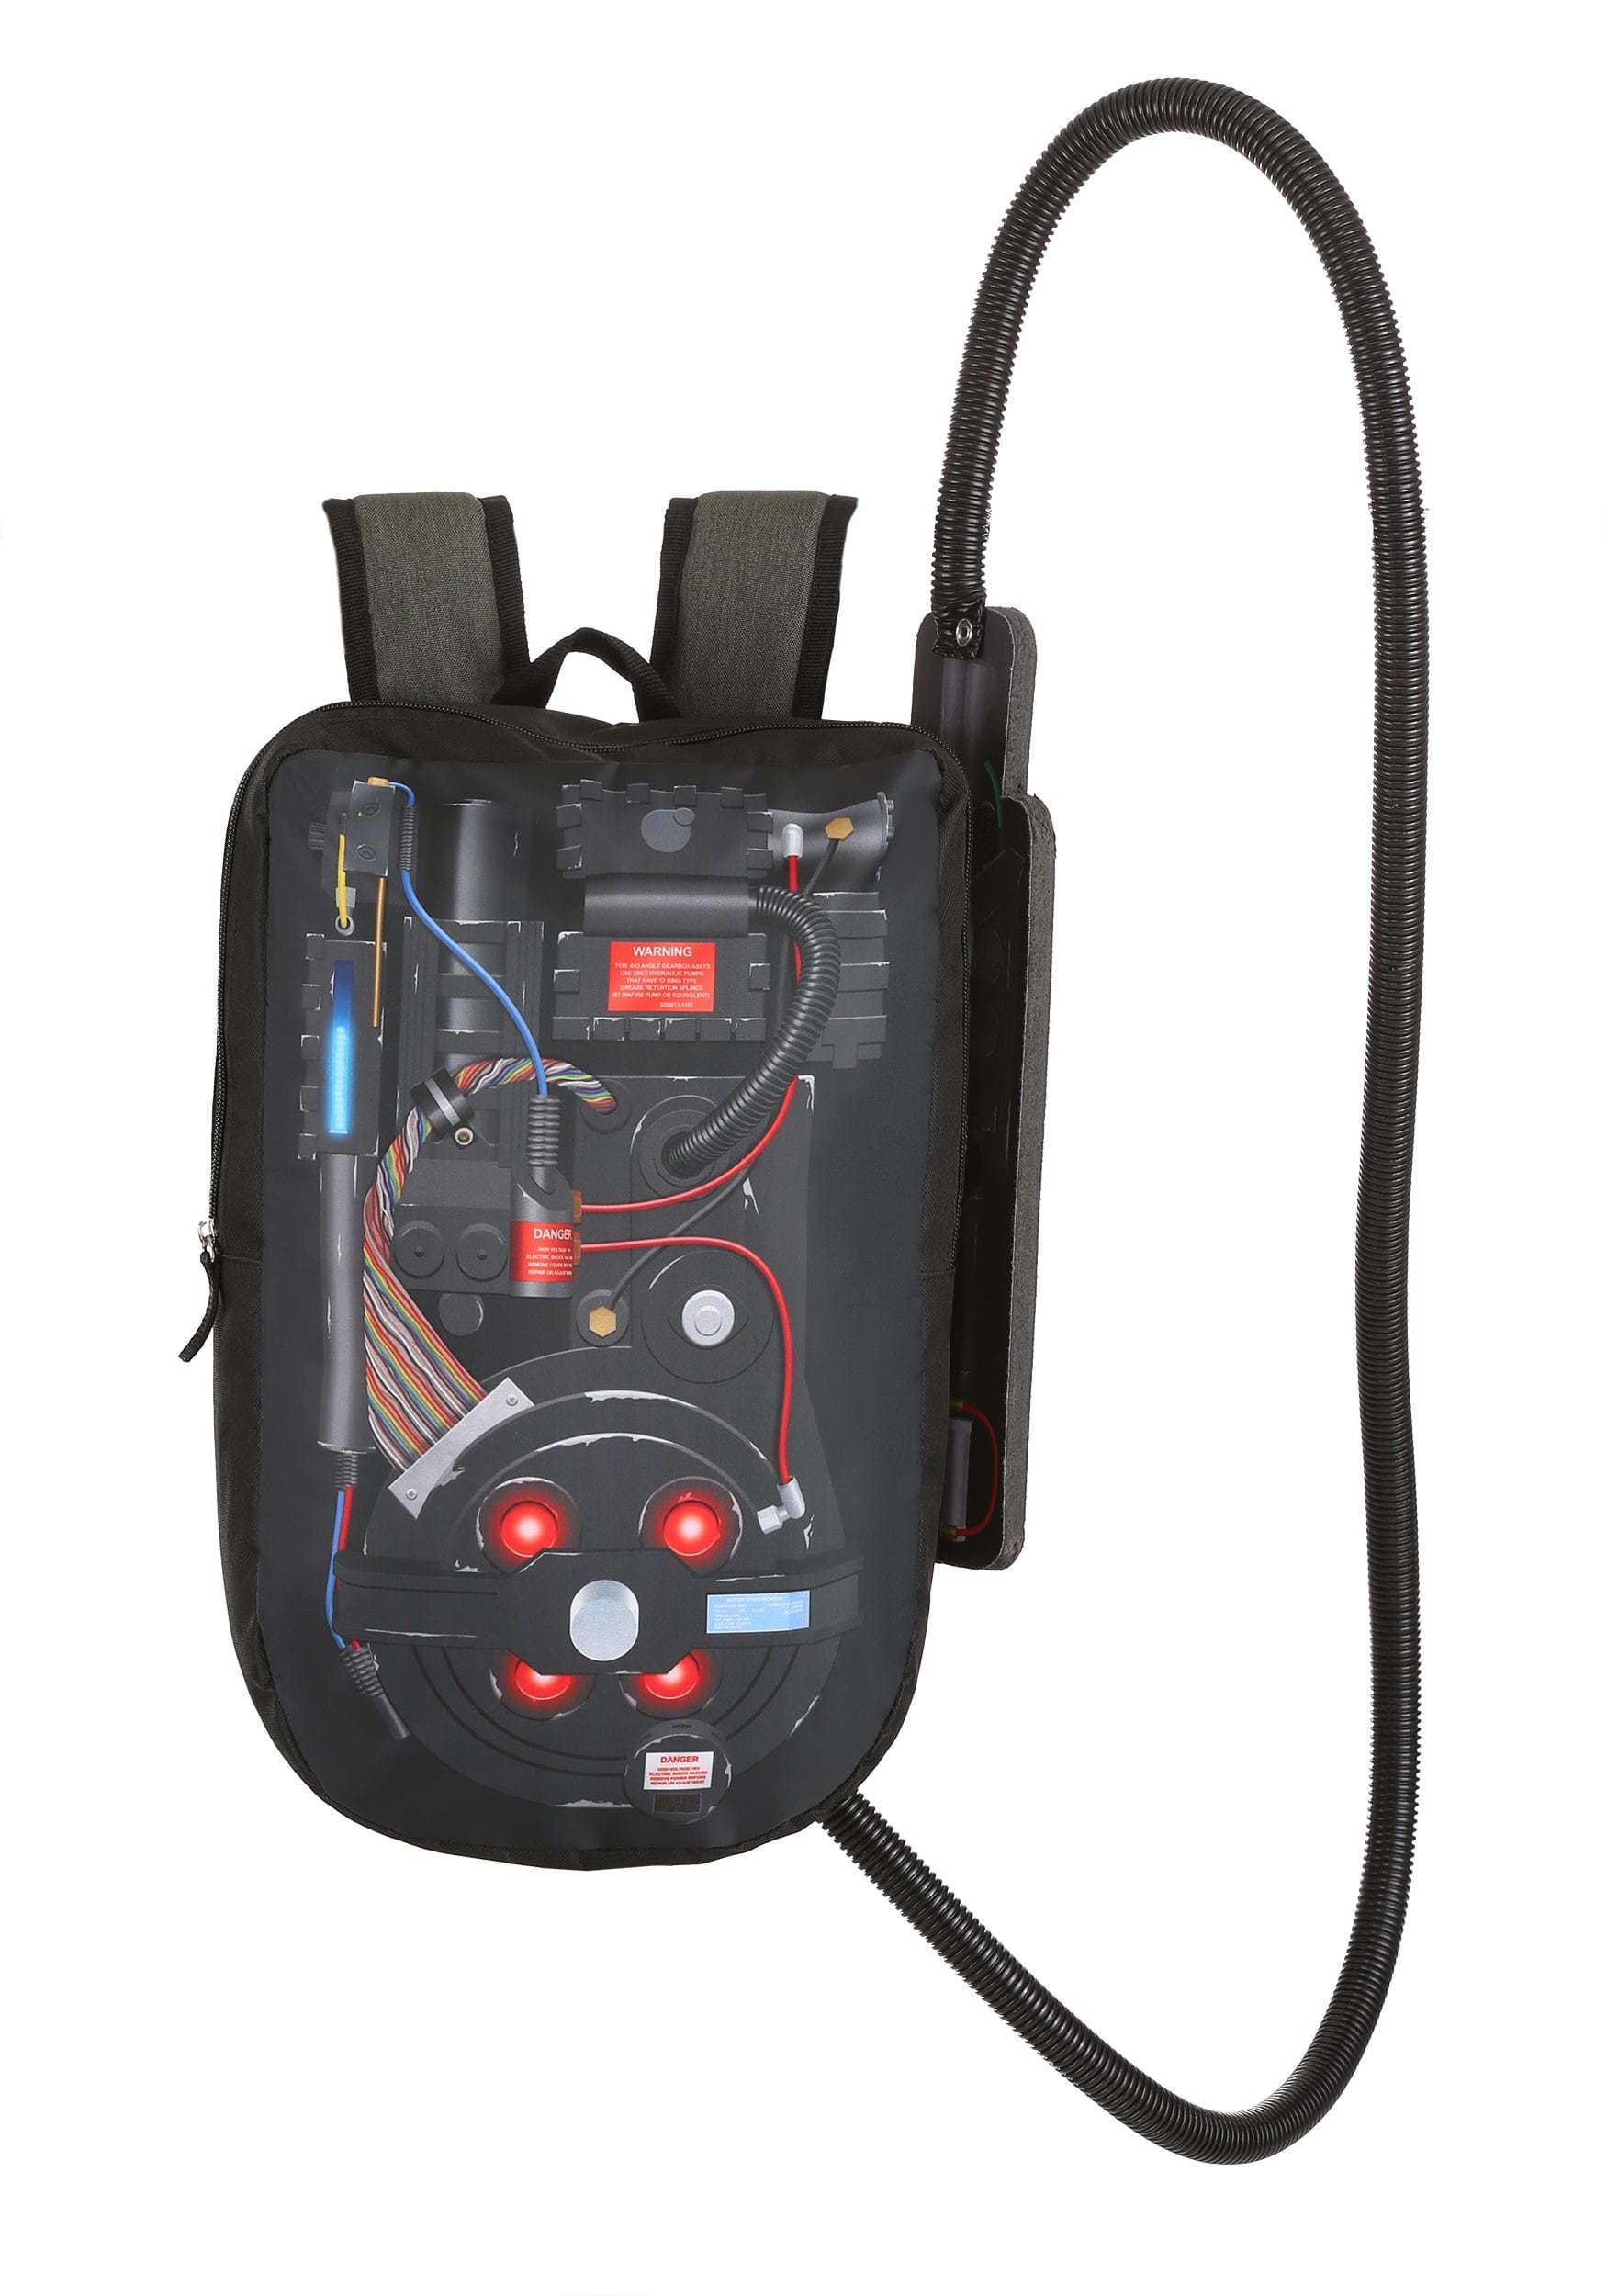 Ghostbuster Proton Backpack for Kids